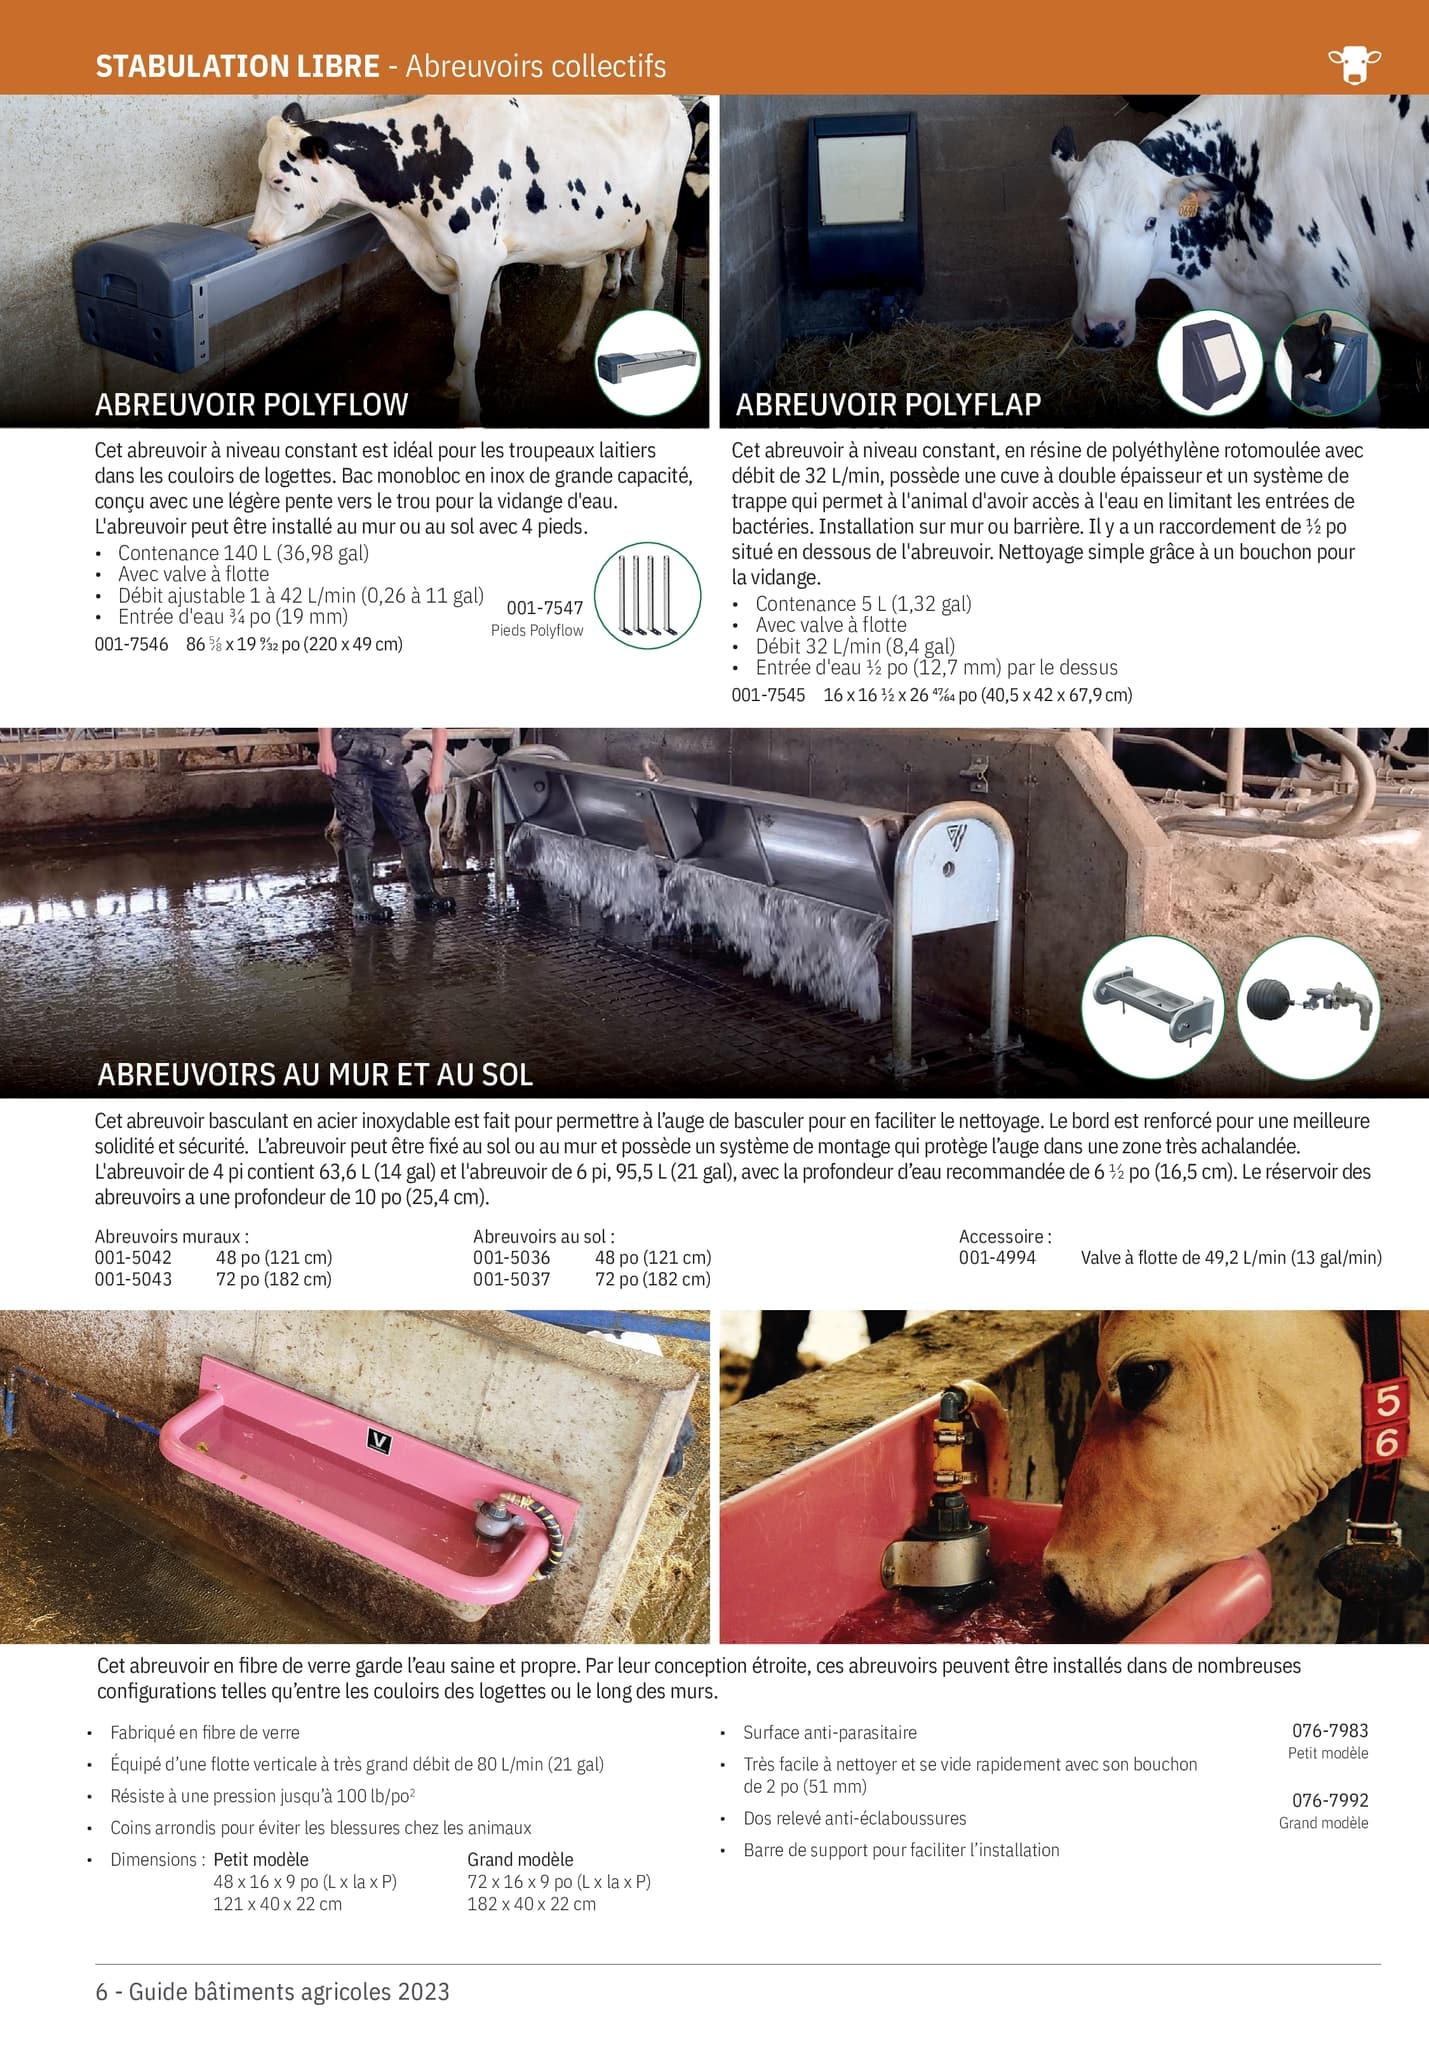 Circulaire BMR - Guide Agricole 2023 - Page 6